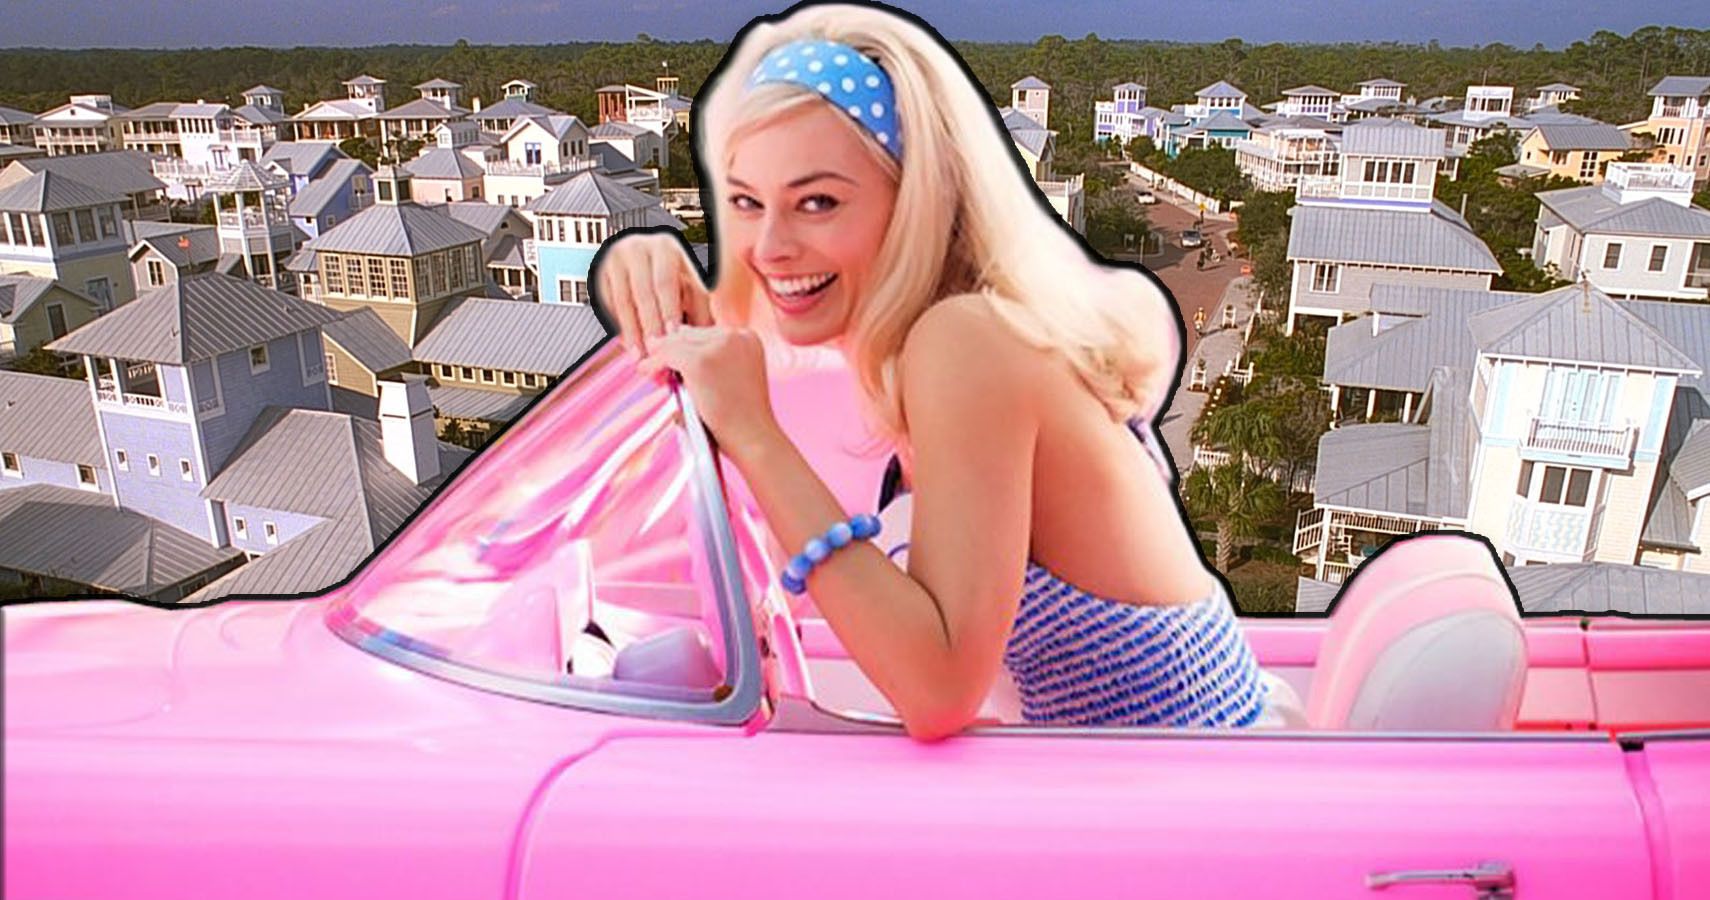 Barbie overlayed in her pink convertible on a backdrop of the town from Truman Show